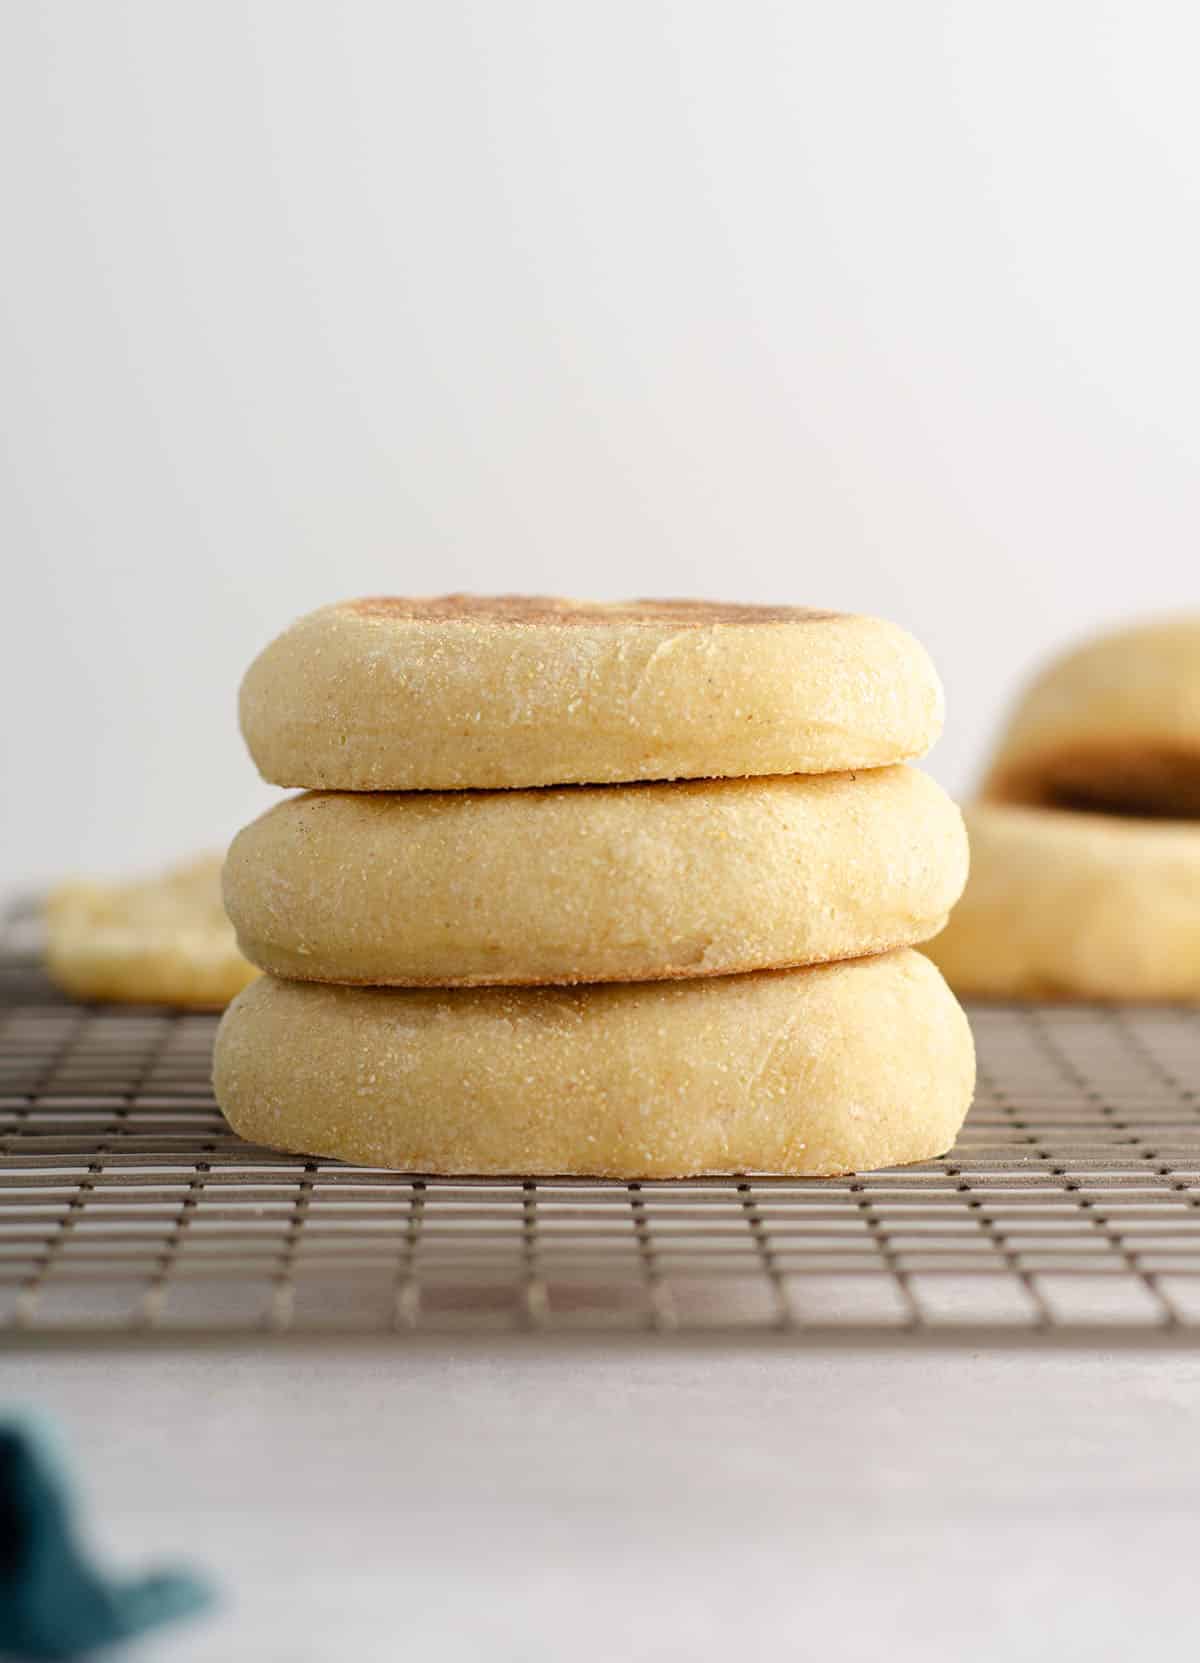 Sourdough English Muffins: Put that sourdough starter to good use and make your own sourdough English muffins from scratch, with all the nooks and crannies you love about the store-bought ones!